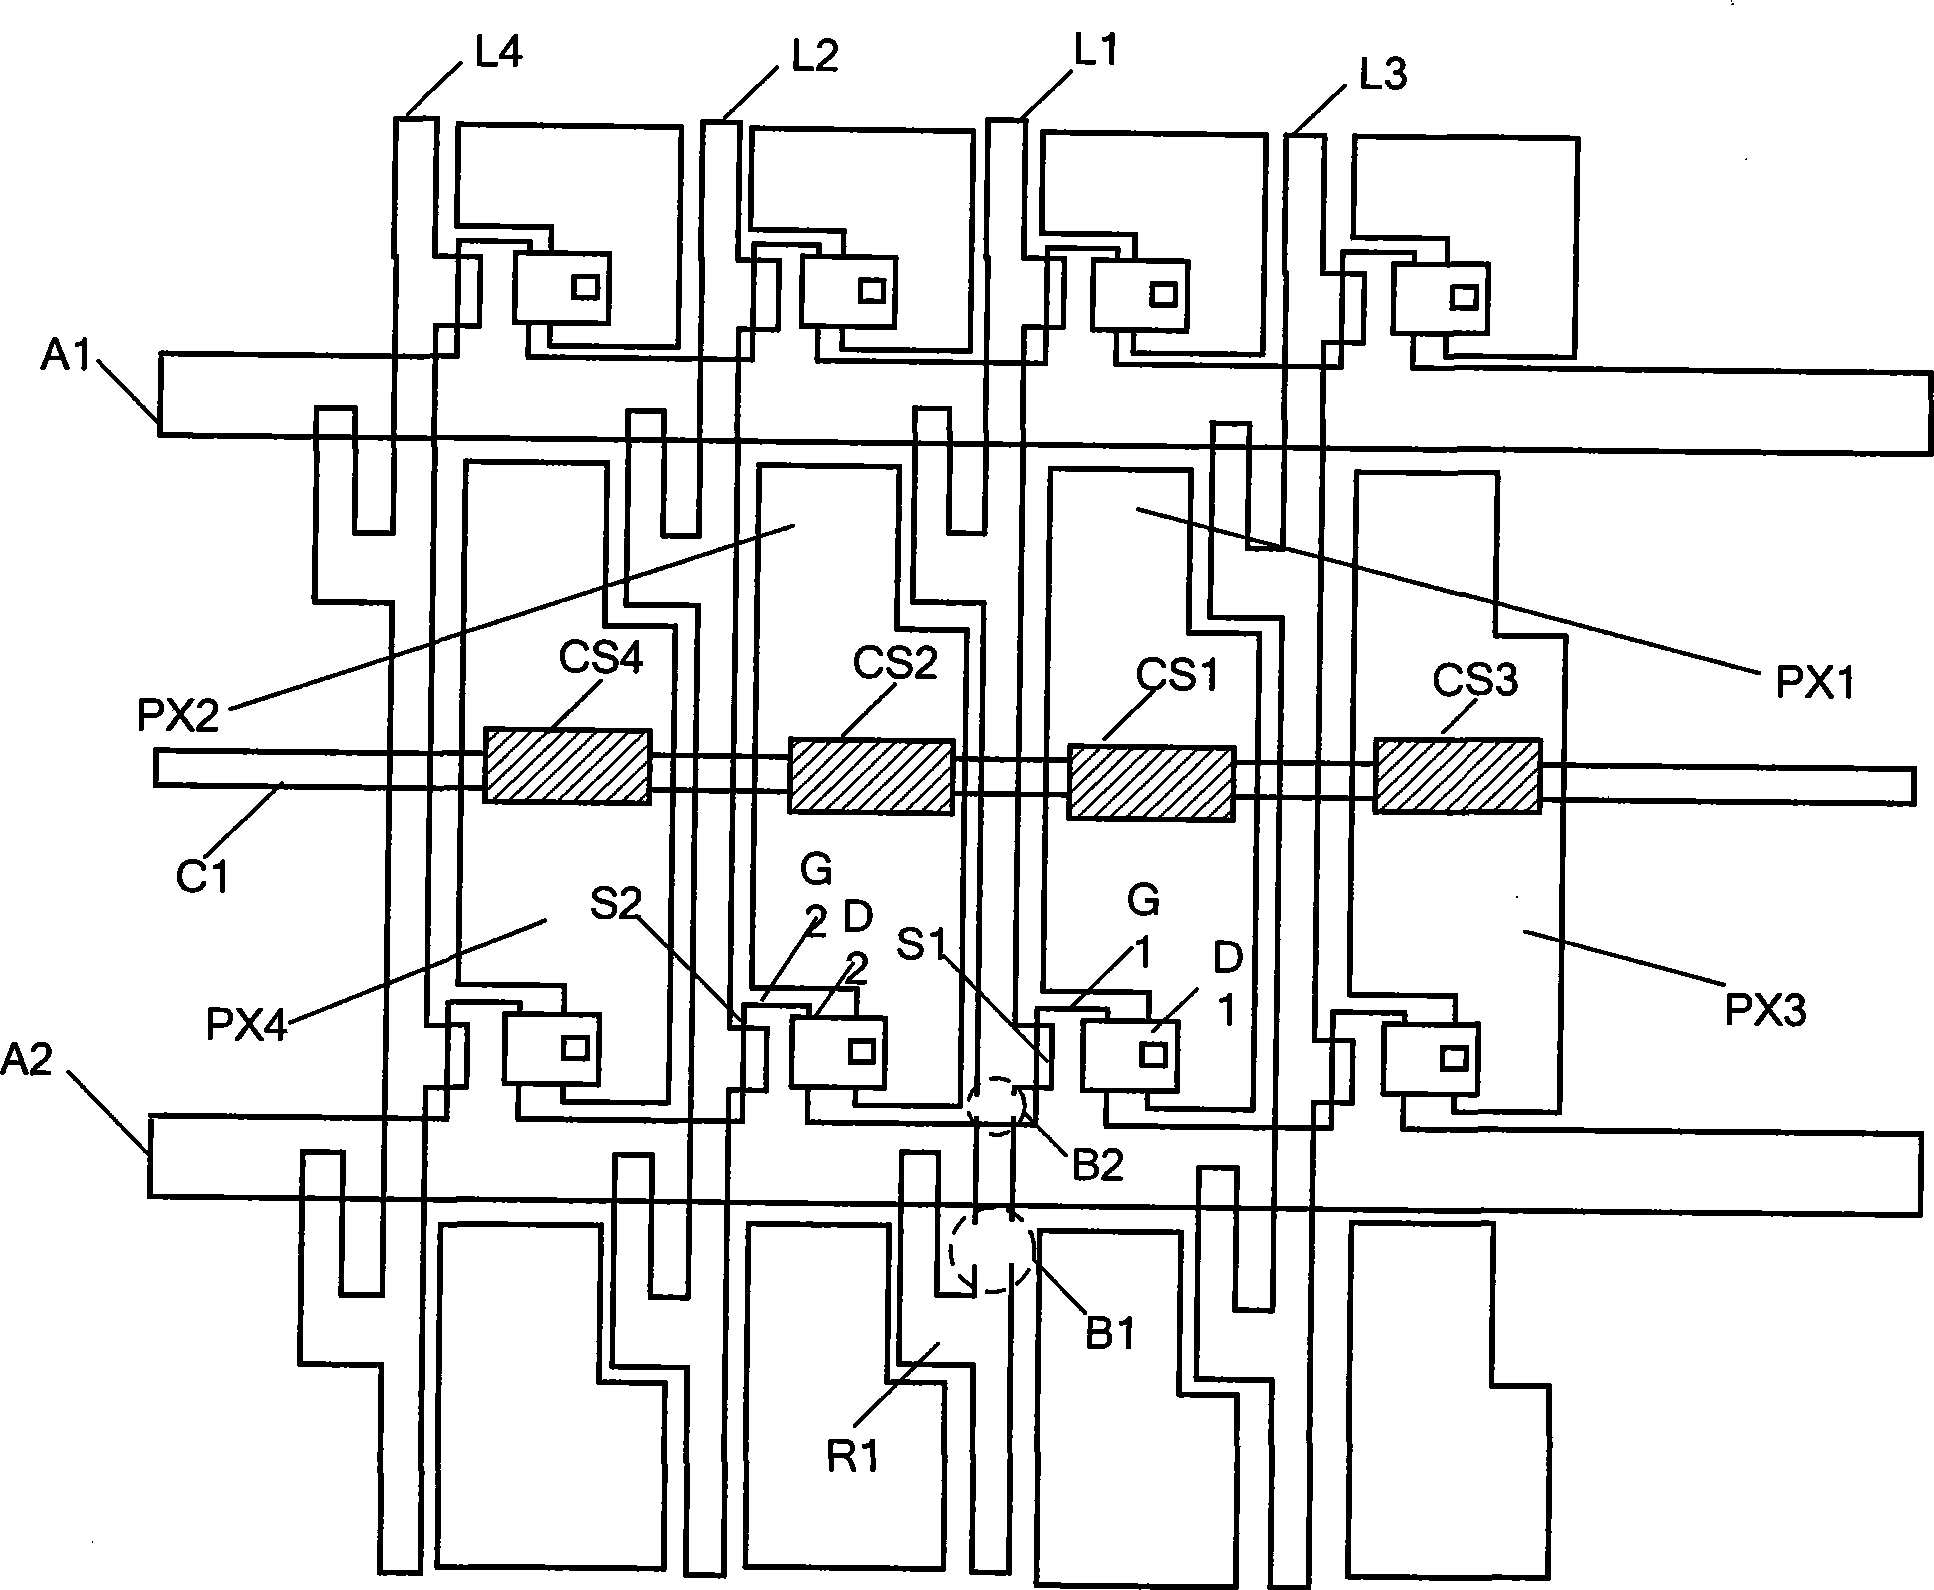 Method for repairing LCD device